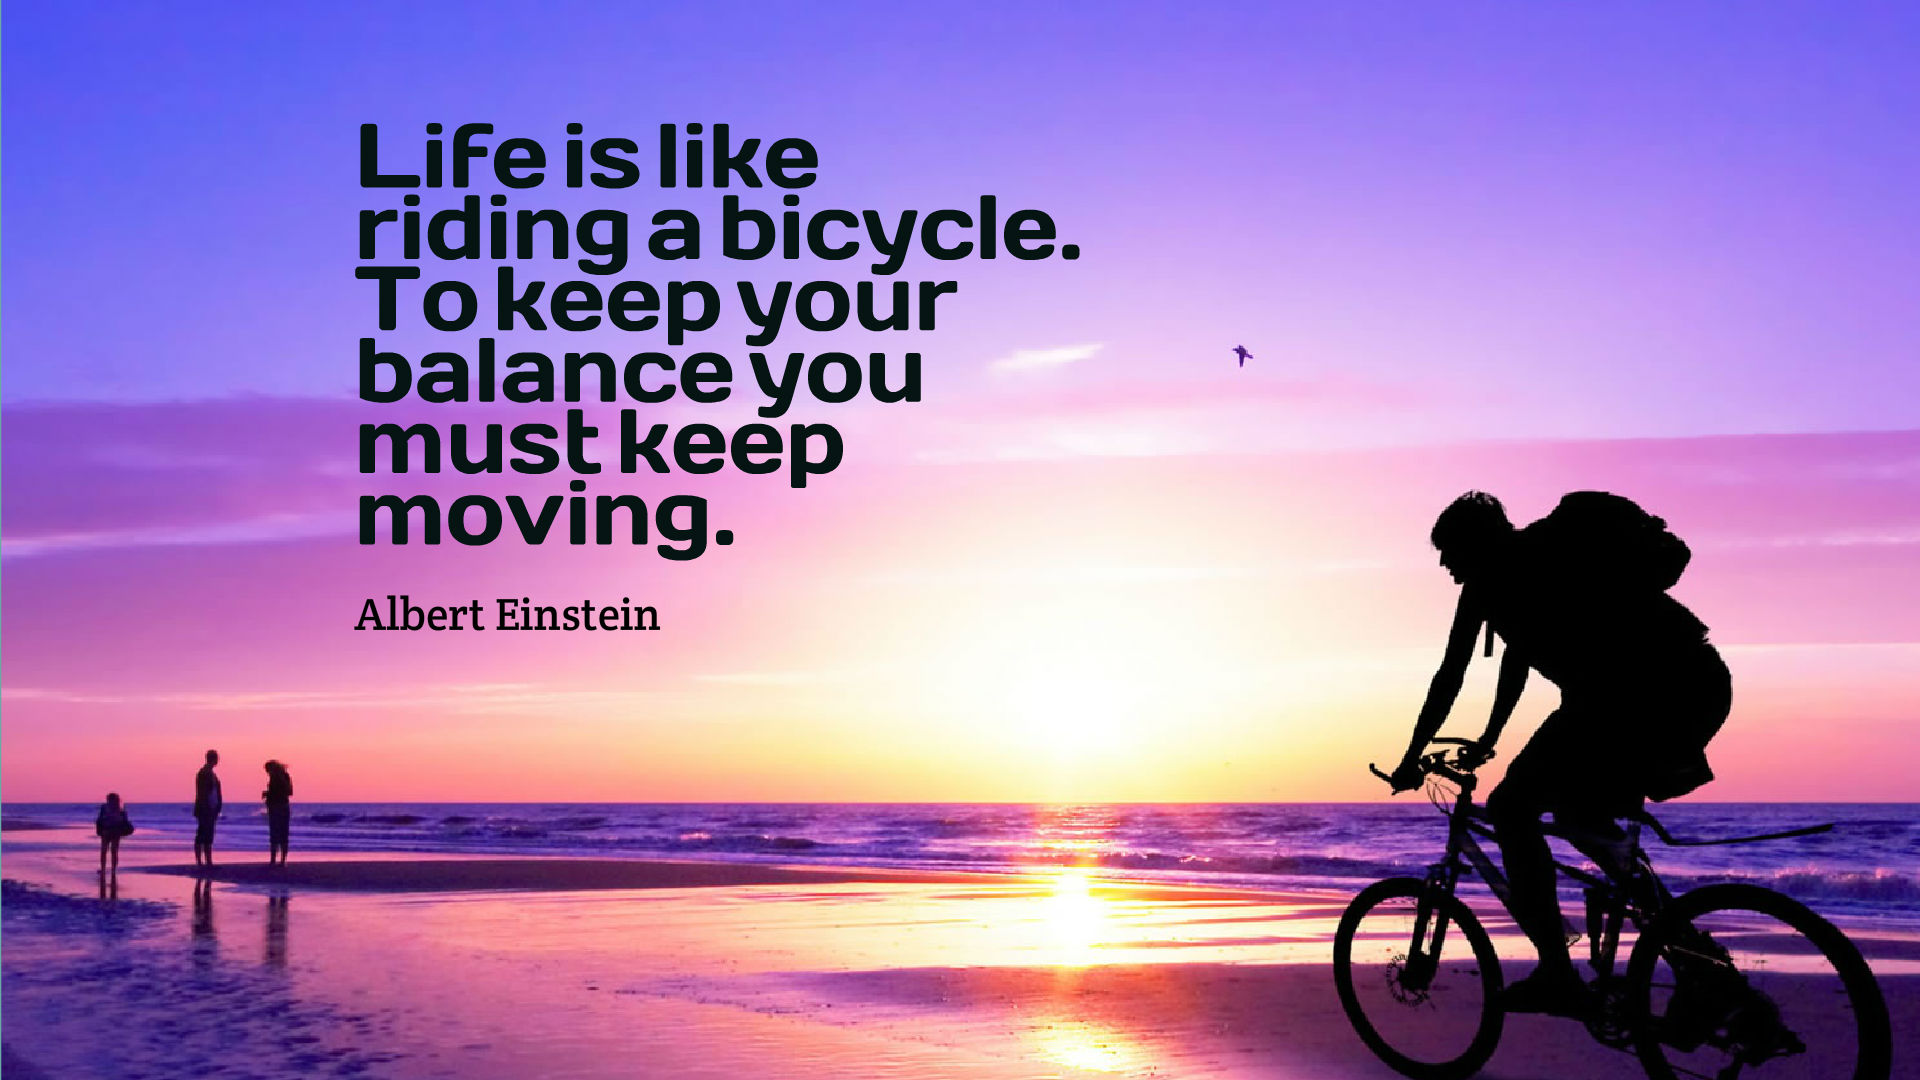 Life Is A Riding Bicycle Quotes Wallpaper - Best About Life Status - HD Wallpaper 